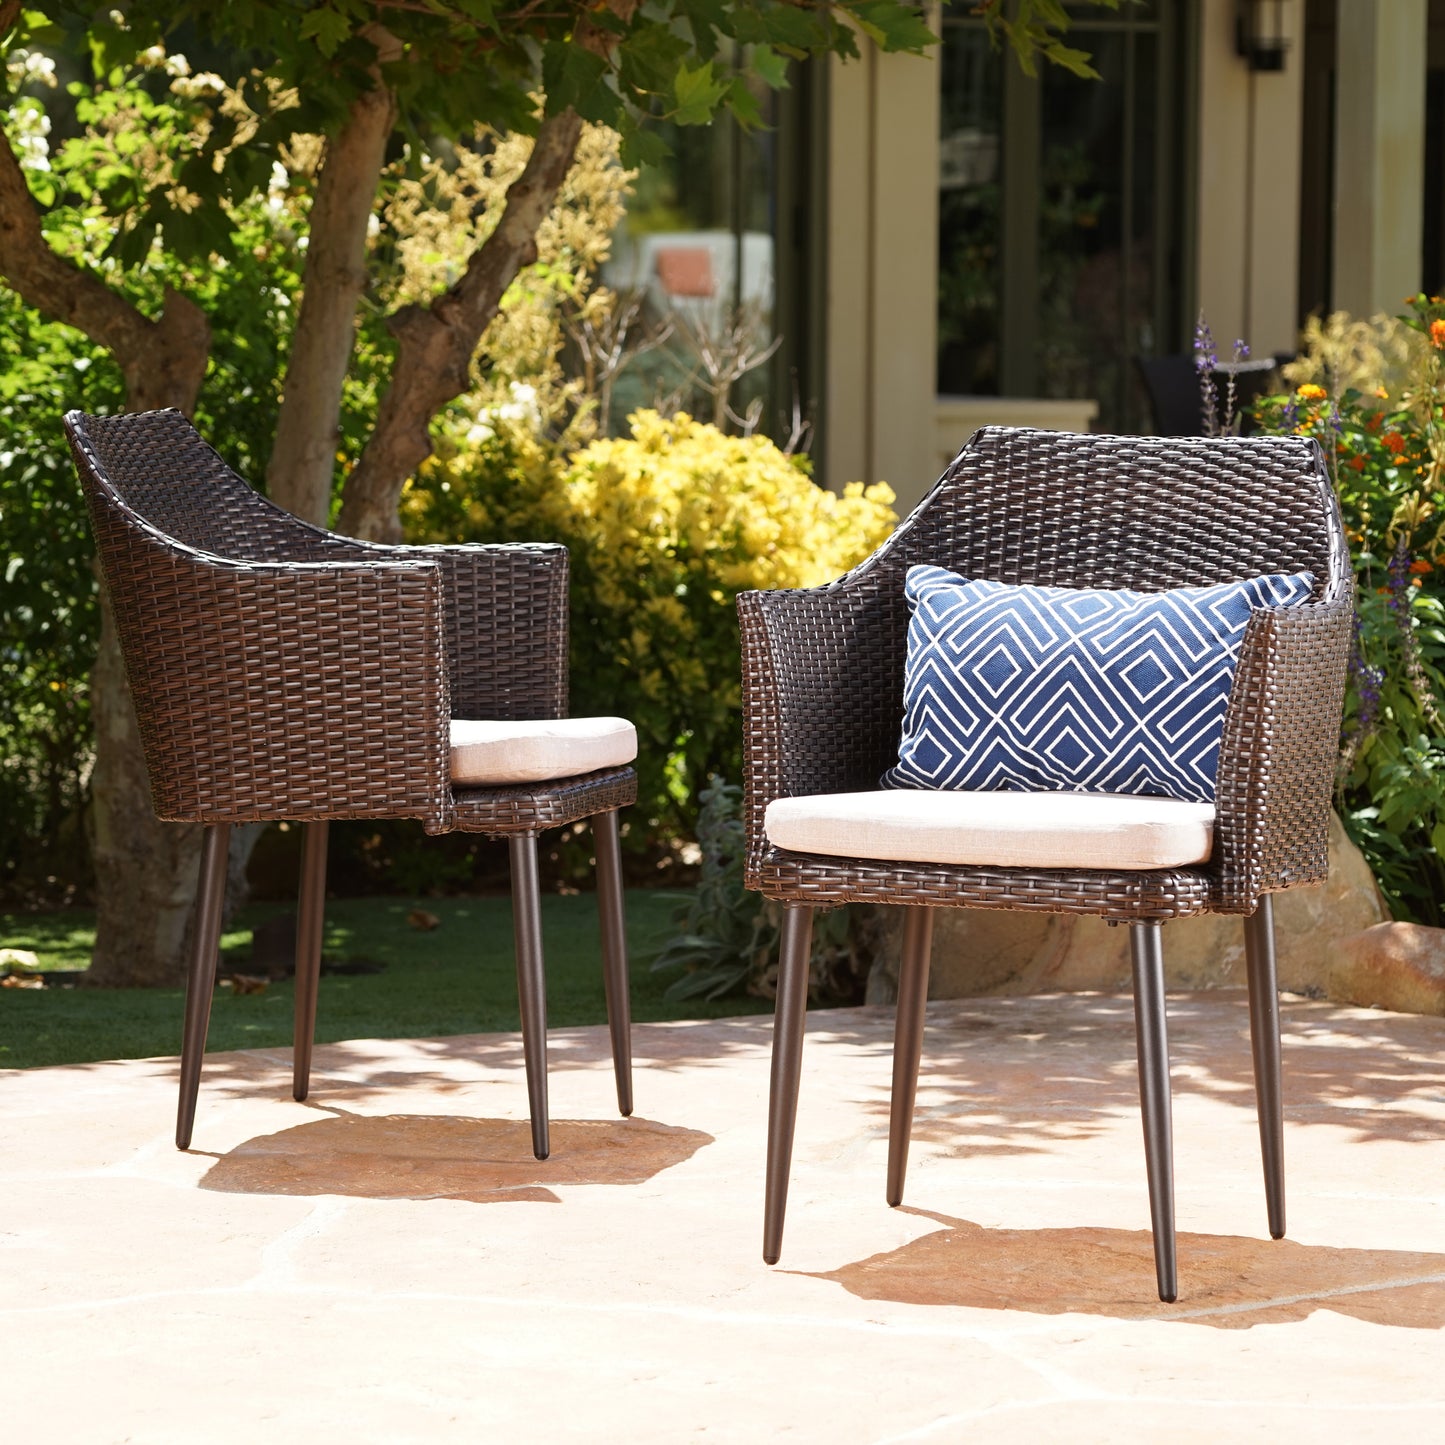 Ibiza Outdoor Wicker Dining Chairs with Water Resistant Cushion (Set of 2)